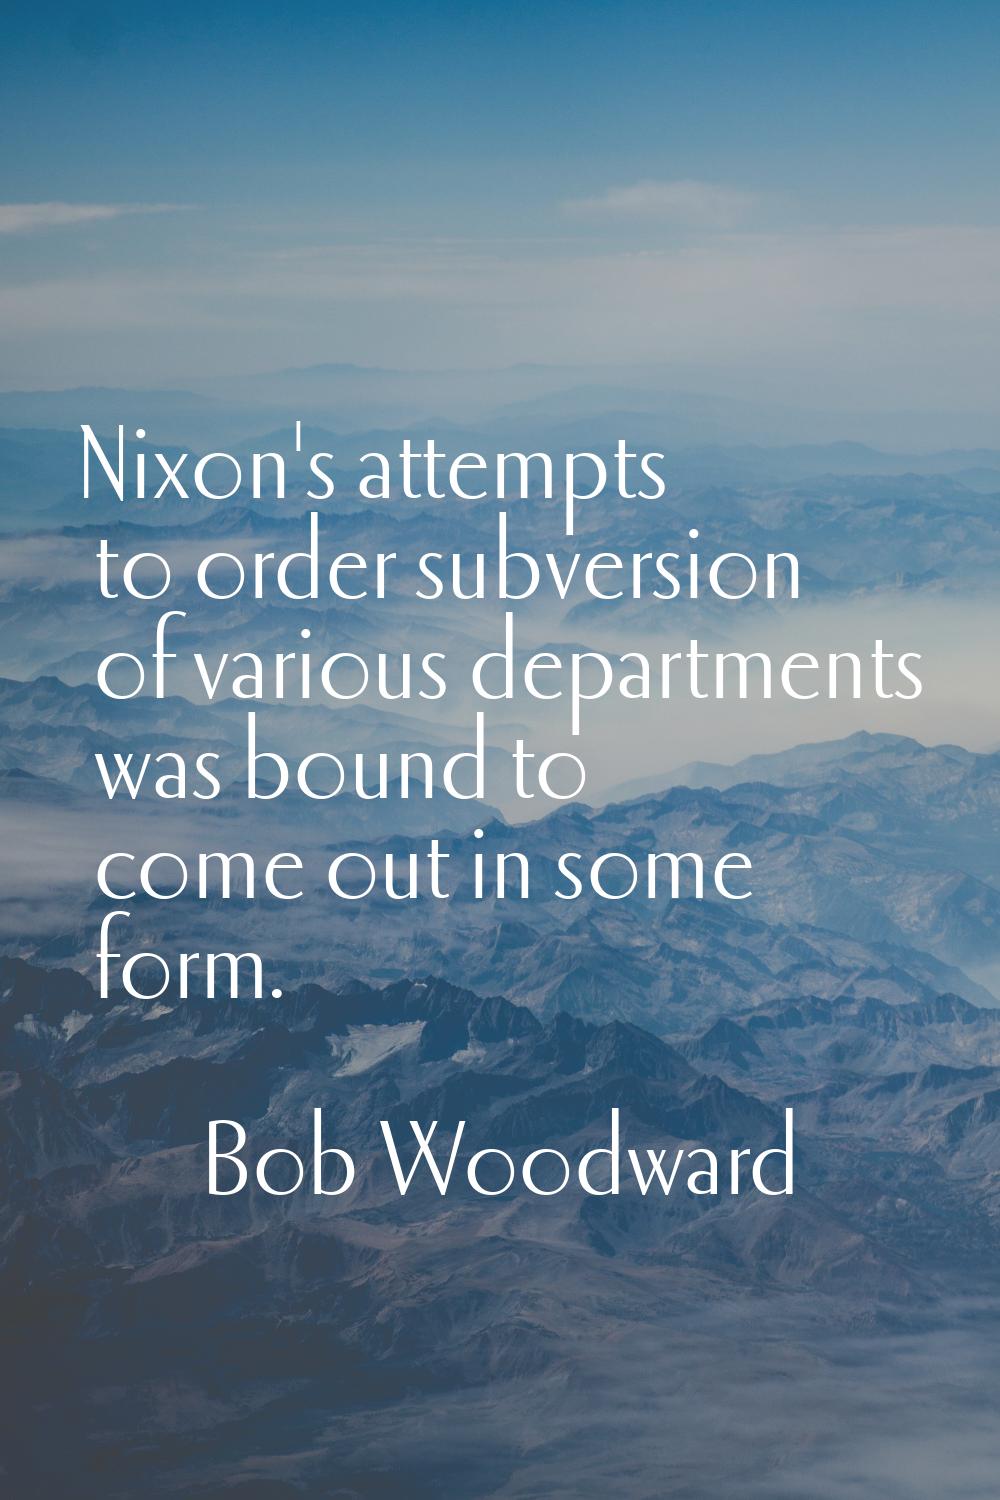 Nixon's attempts to order subversion of various departments was bound to come out in some form.